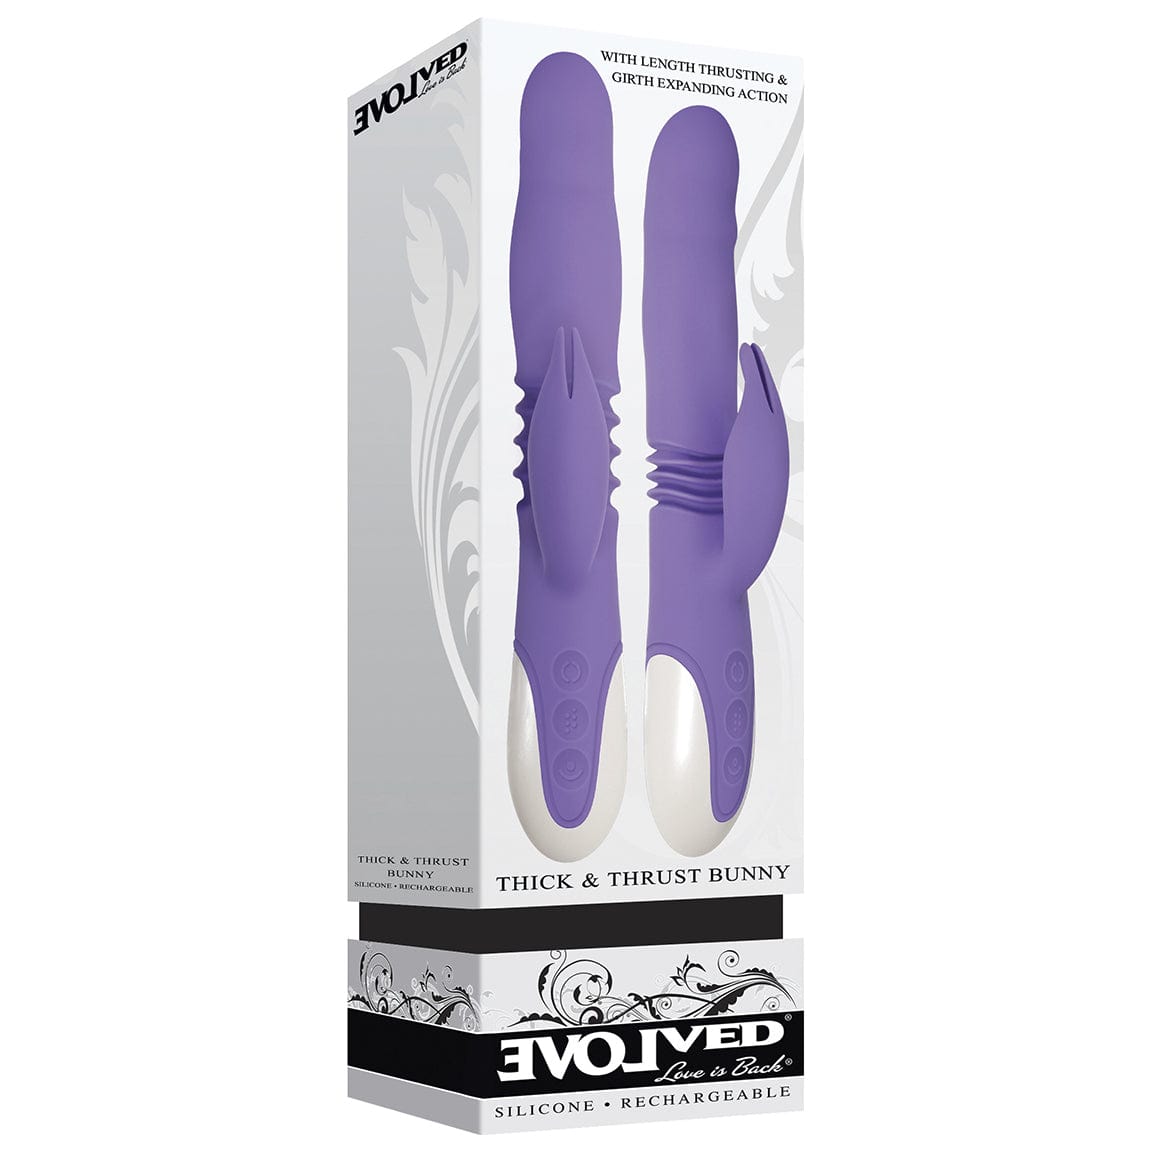 Evolved - Thick and Thrust Bunny Silicone Rechargeable Rabbit Vibrator (Purple) Rabbit Dildo (Vibration) Rechargeable 844477012872 CherryAffairs